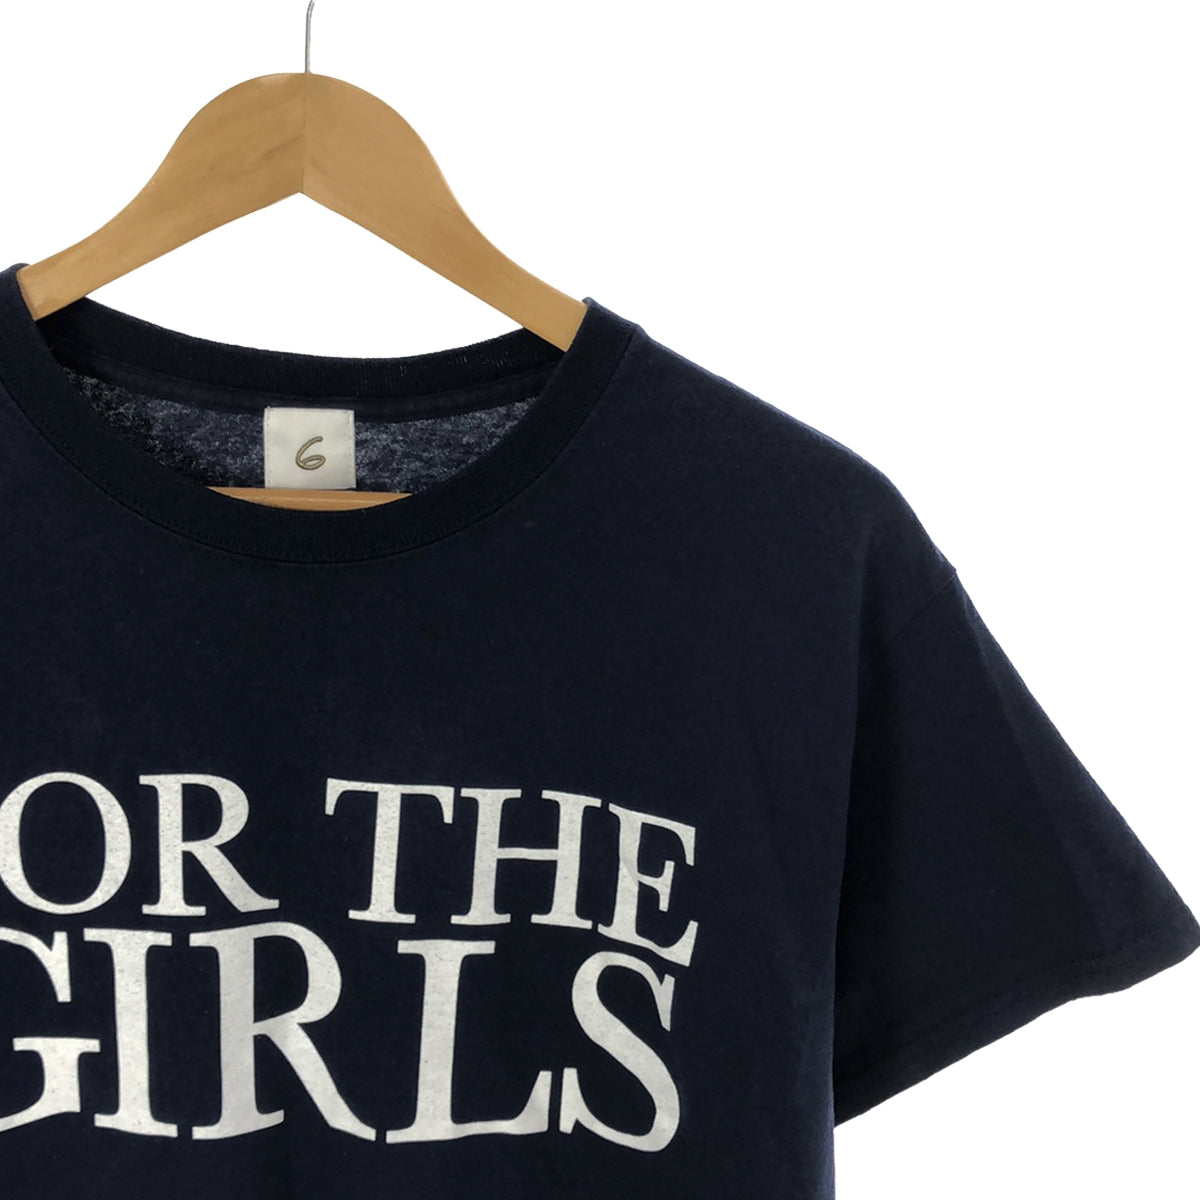 6(ROKU) / ロク | FOR THE GIRLS T-SHIRT カットソー | M |